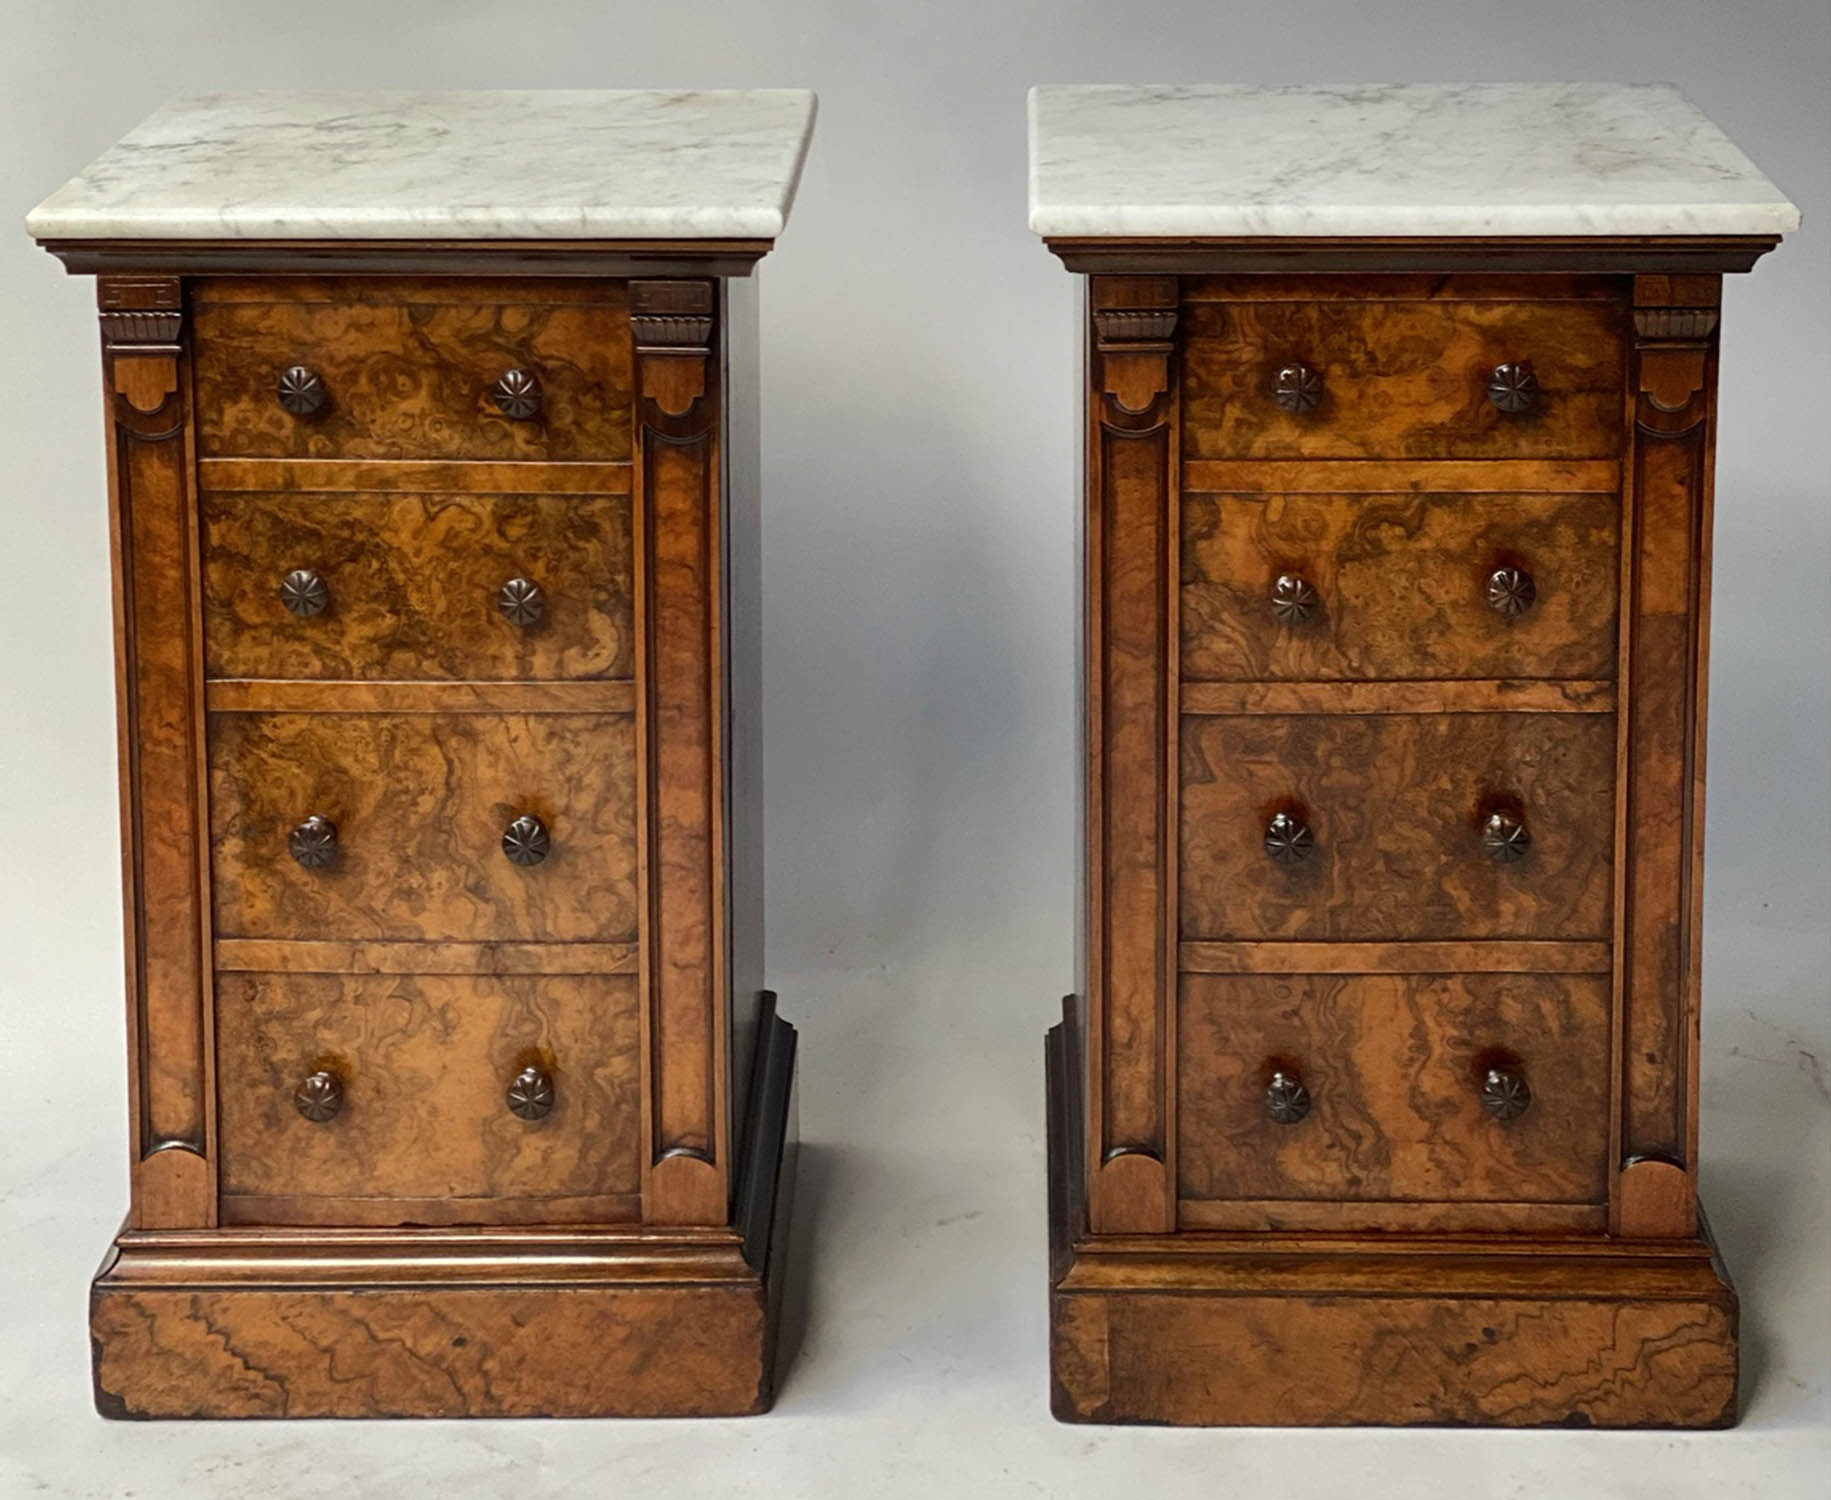 SIDE CABINETS, a pair, Victorian burr walnut each adapted with marble top above a panelled door